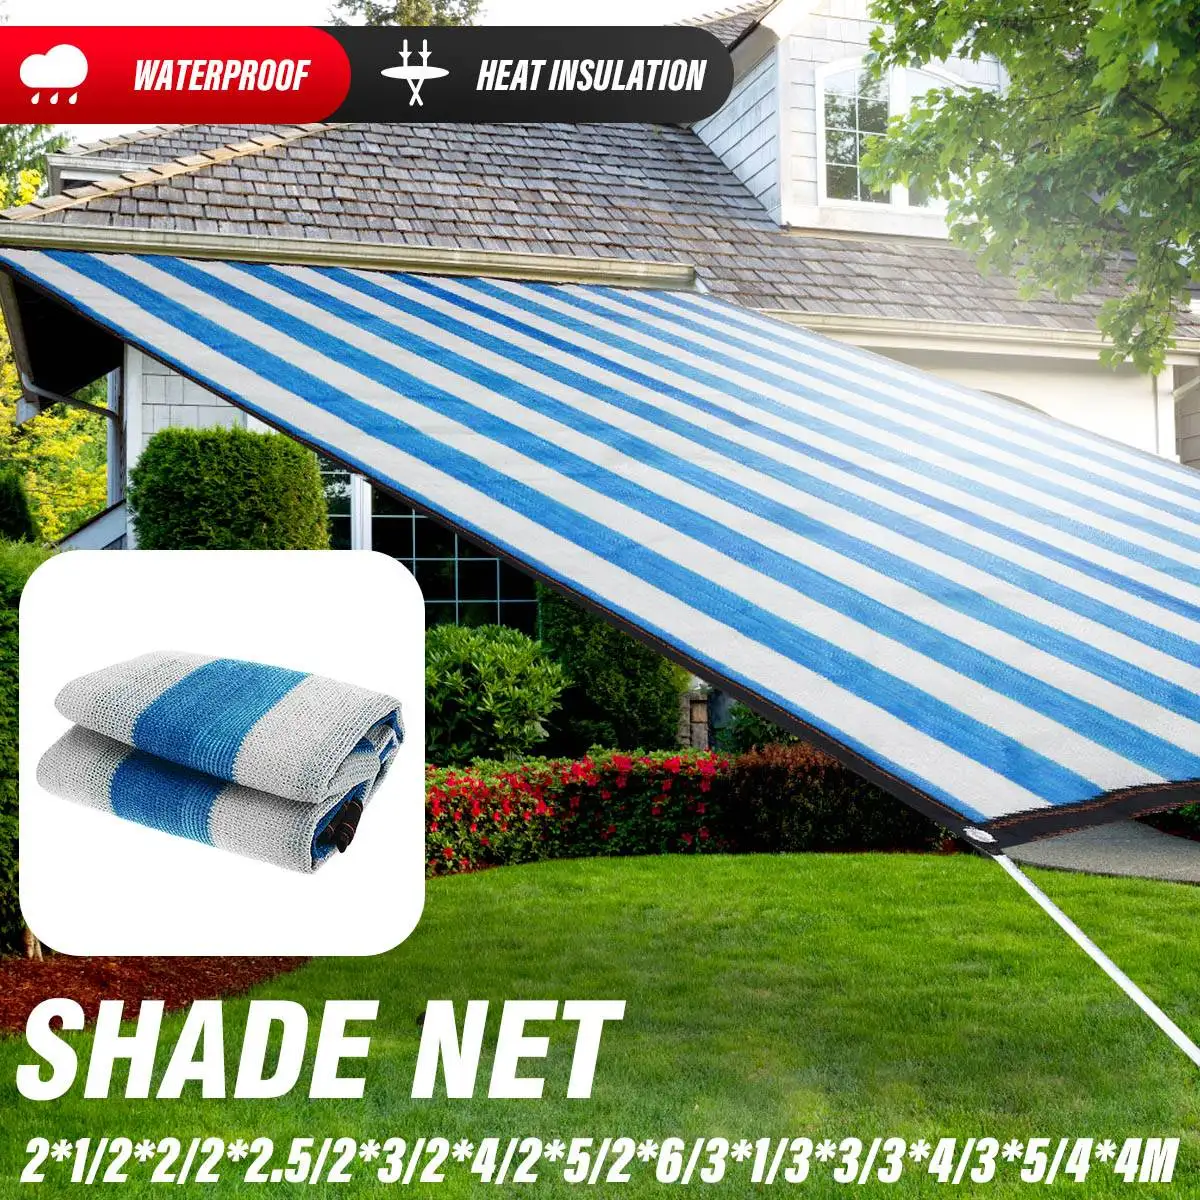 Details about   Greenhouse Covers Anti-UV Sunshade Net Sunscreen Cloth Car Sunblock Shade Cover 